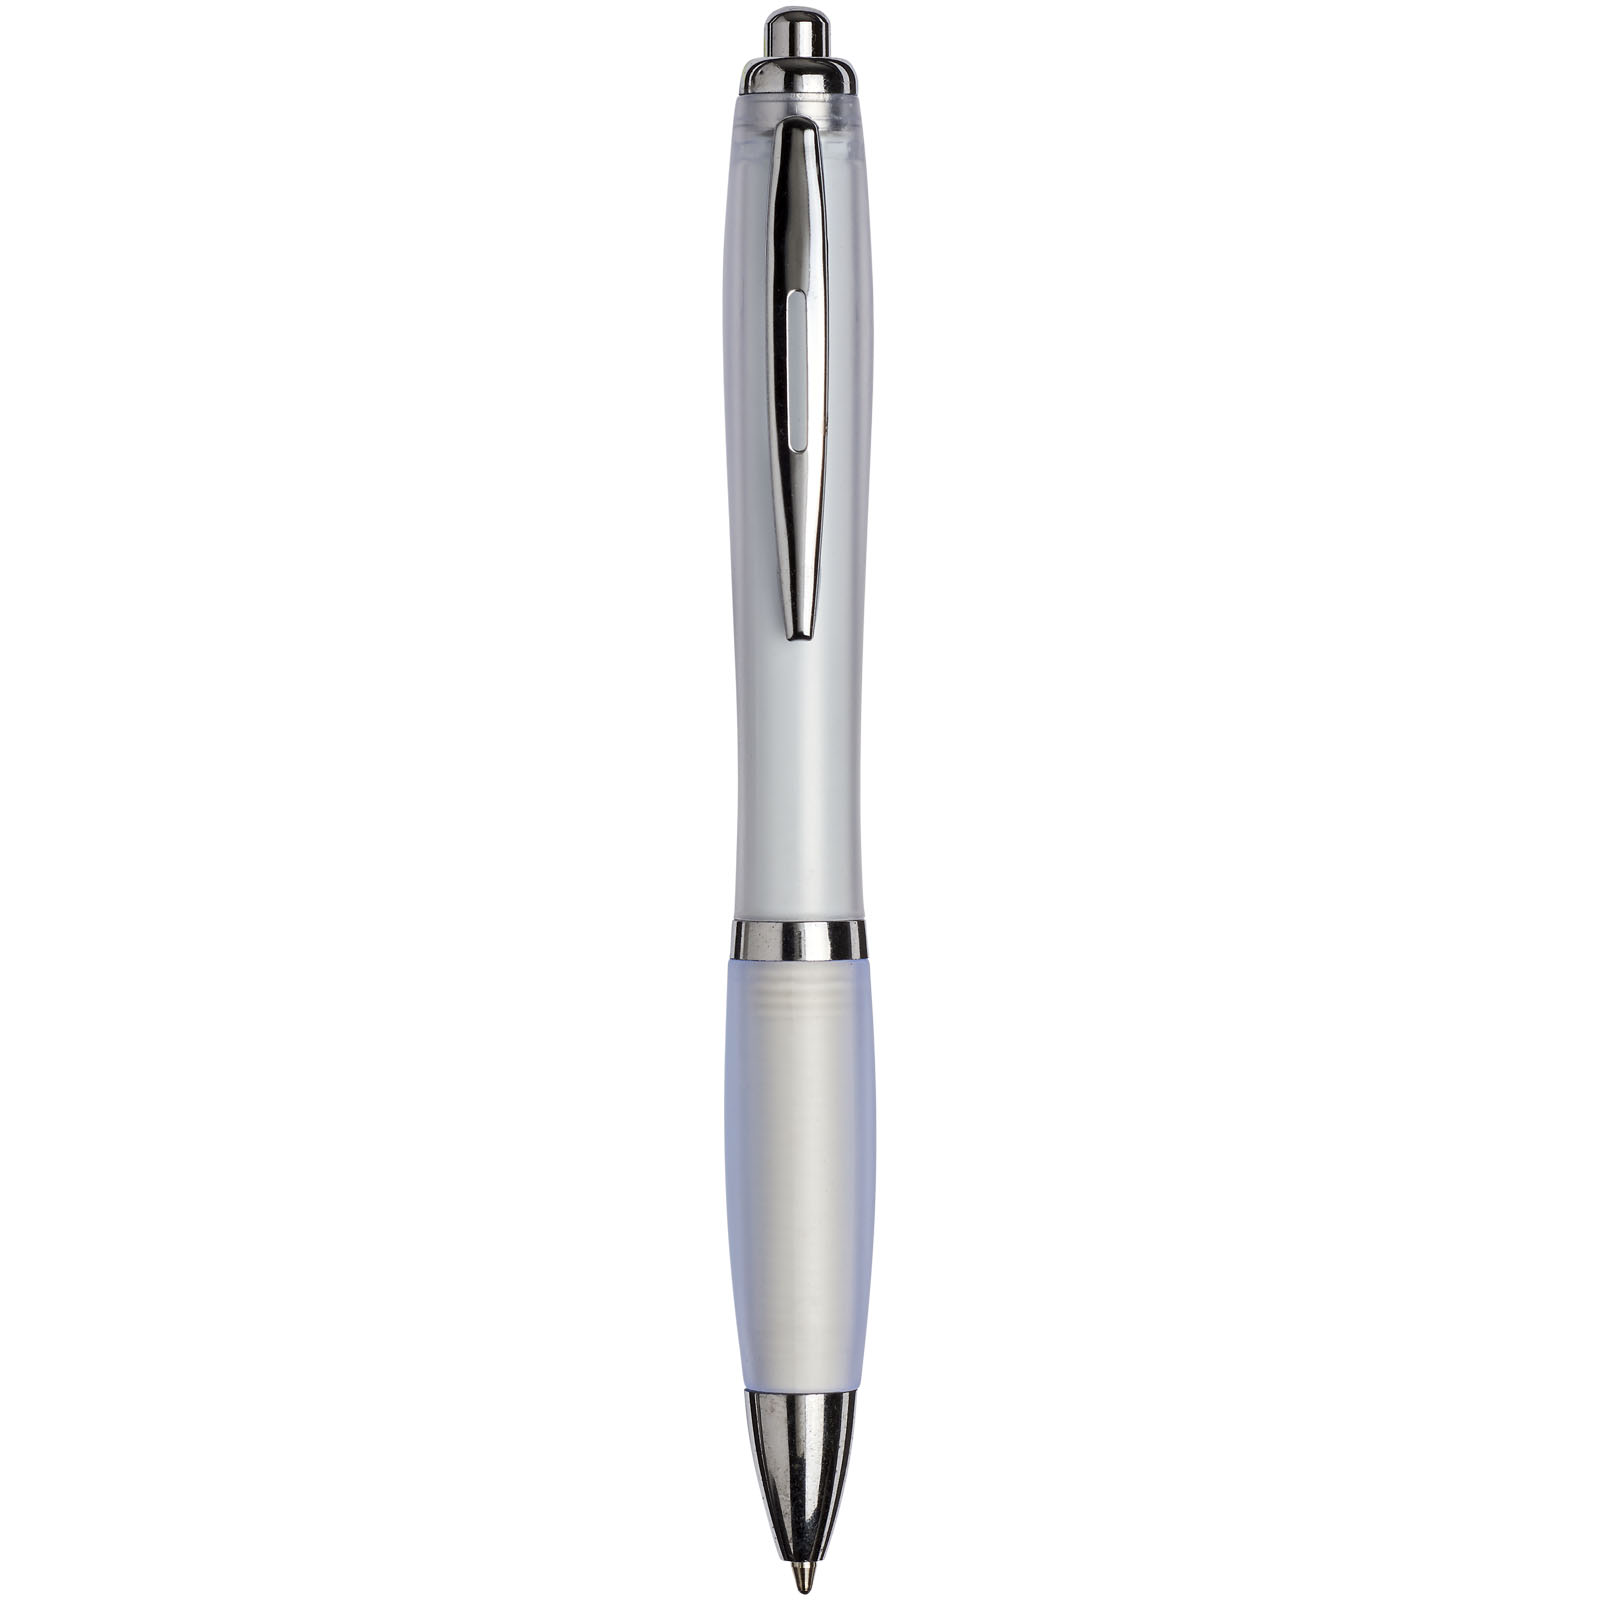 Stylos-bille publicitaires - Curvy ballpoint pen with frosted barrel and grip - 0